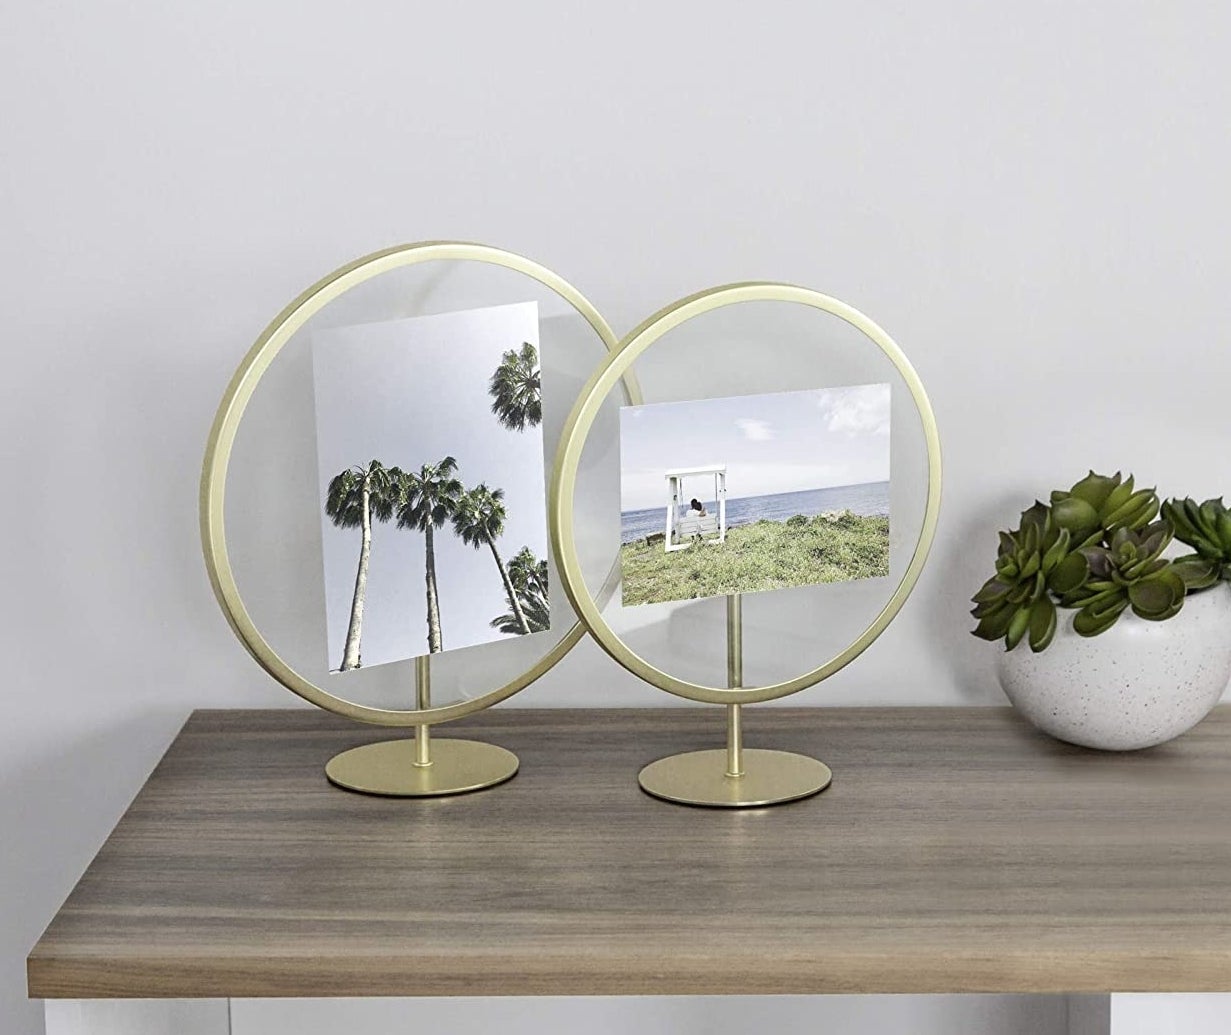 Two gold circular frames and stands with pictures in the glass center